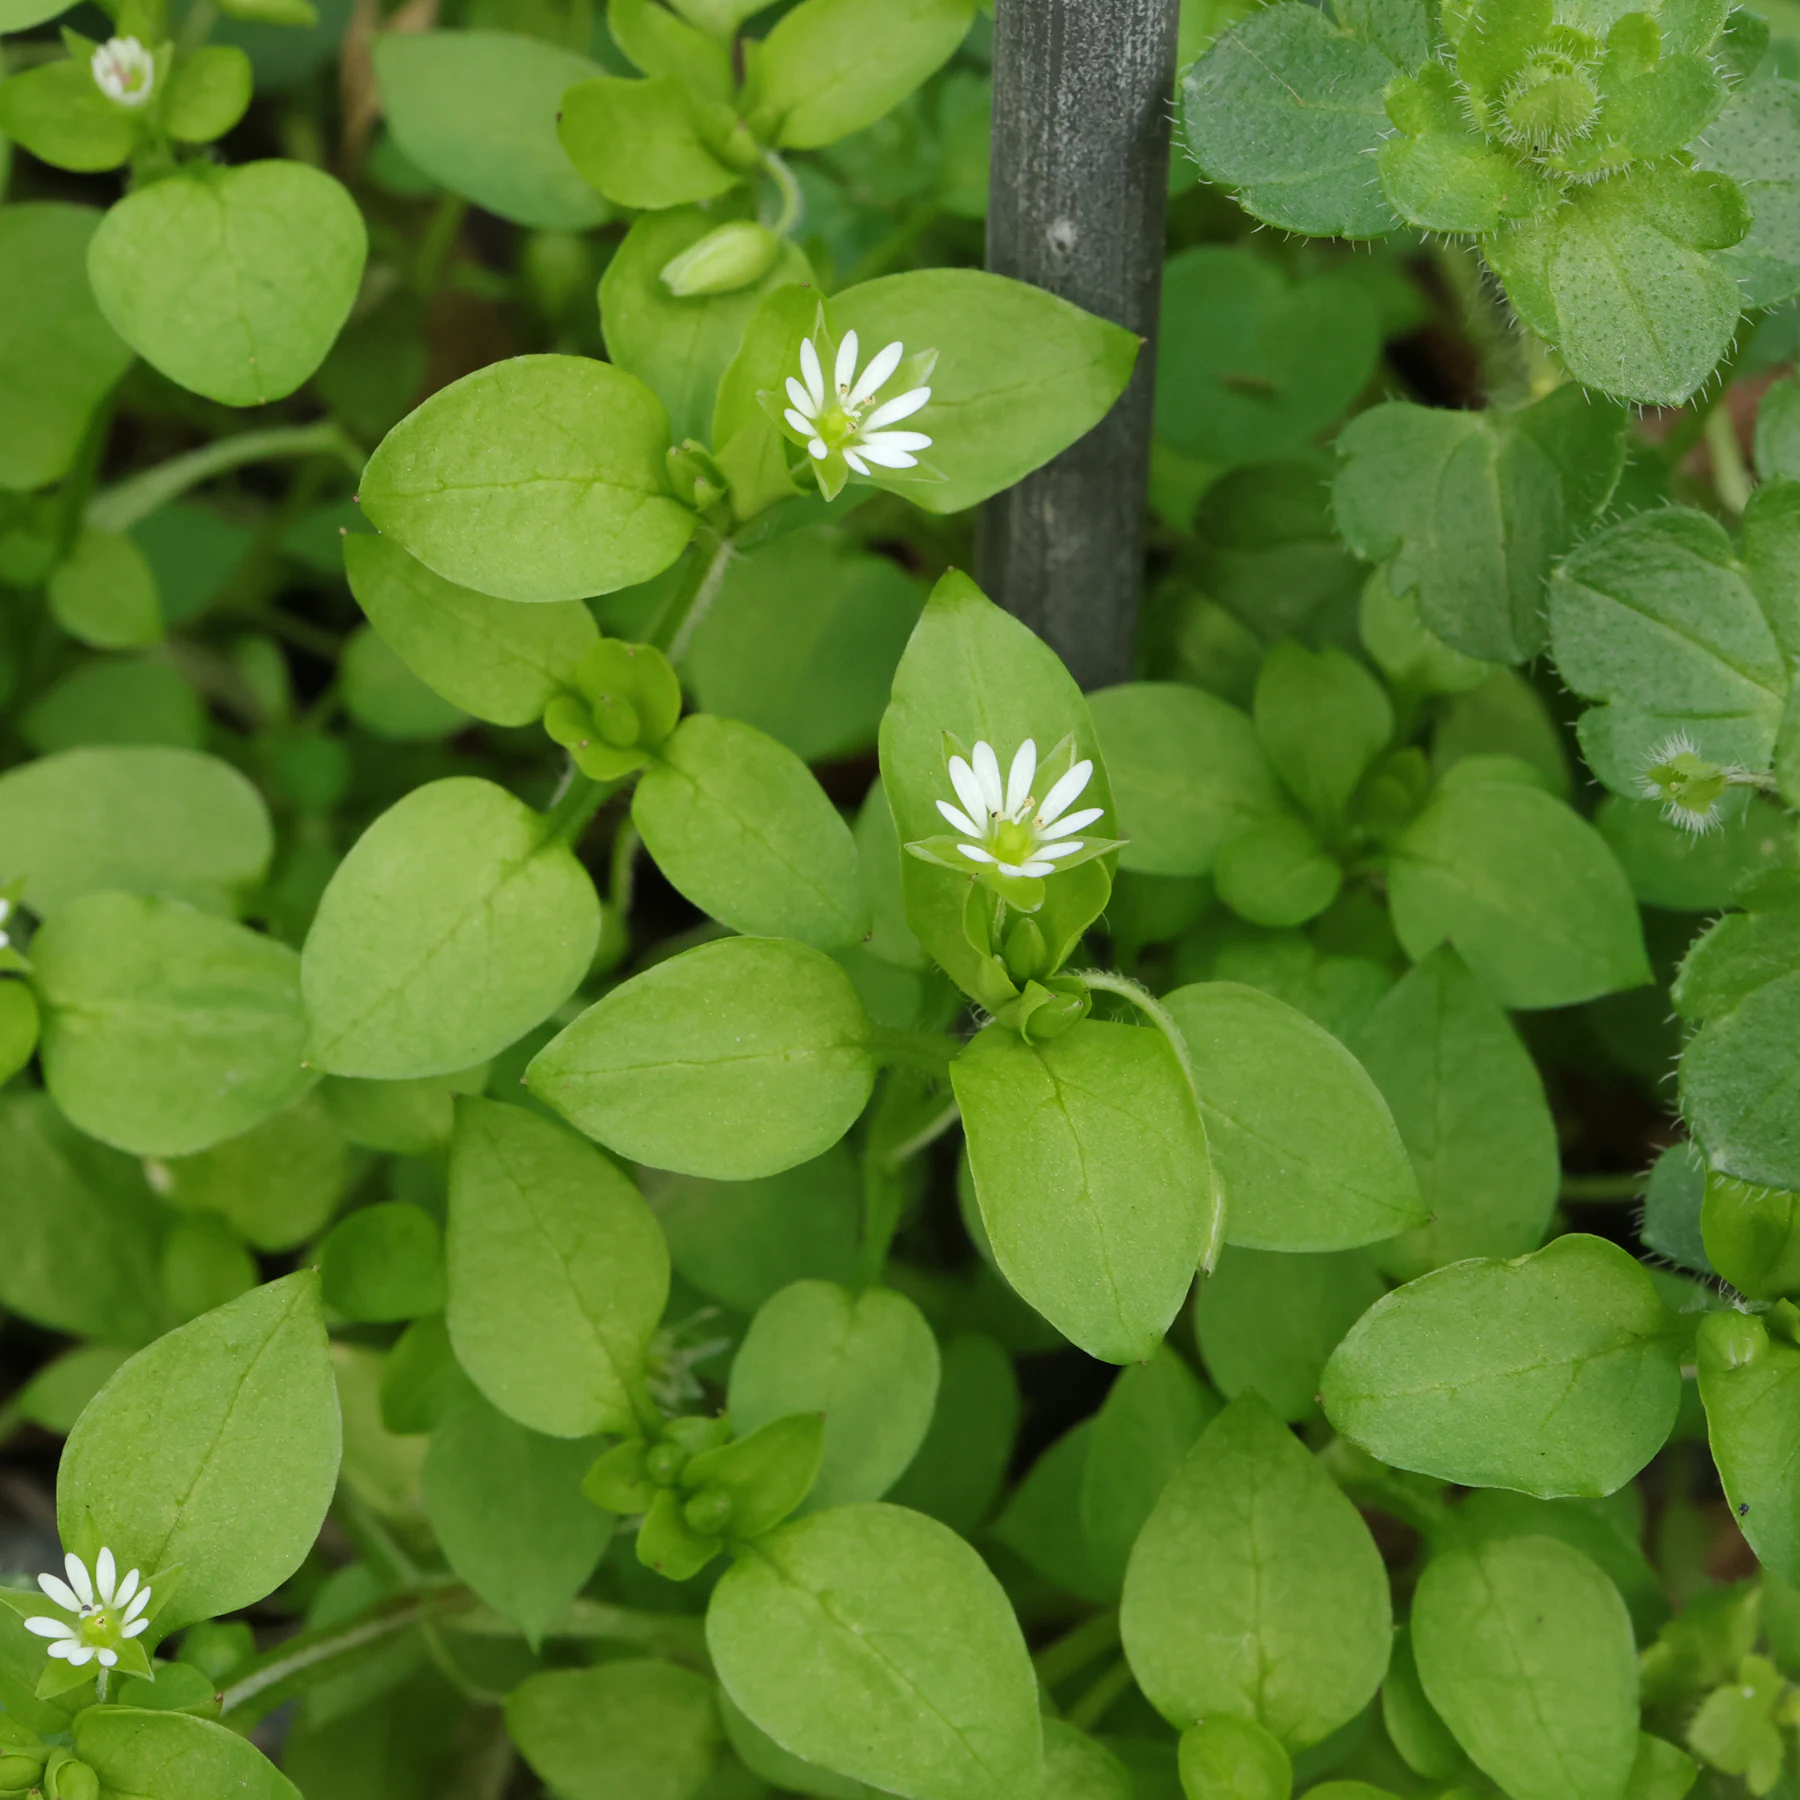 Chickweed flowers in February